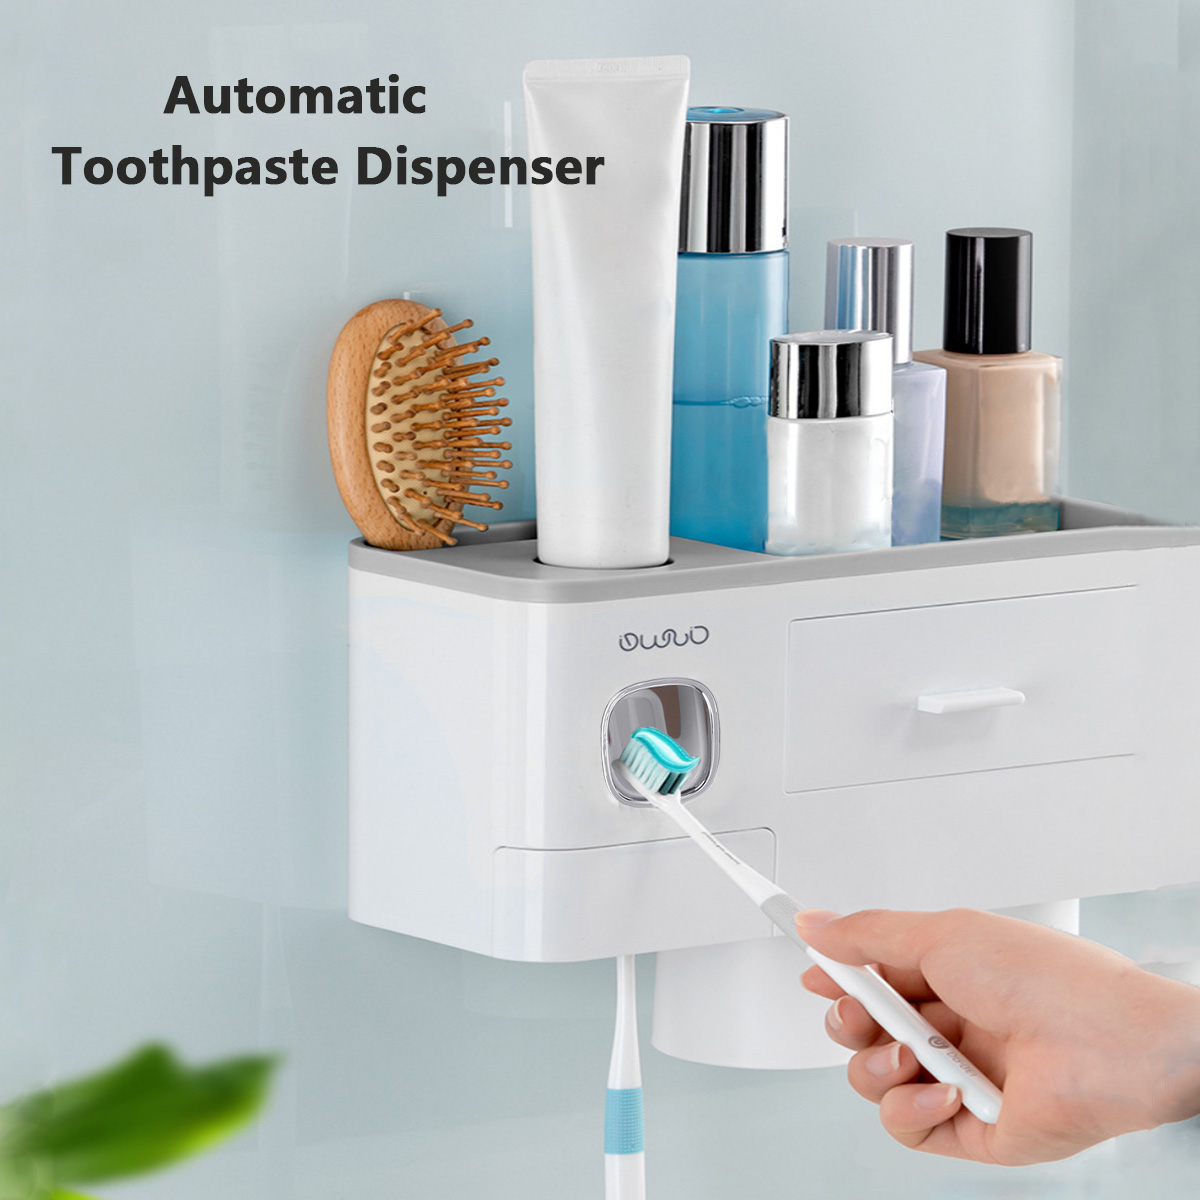 Toothbrush-Holder-Automatic-Toothpaste-Dispenser-With-Cup-Wall-Mount-Toiletries-Storage-Rack-Bathroo-1755230-3